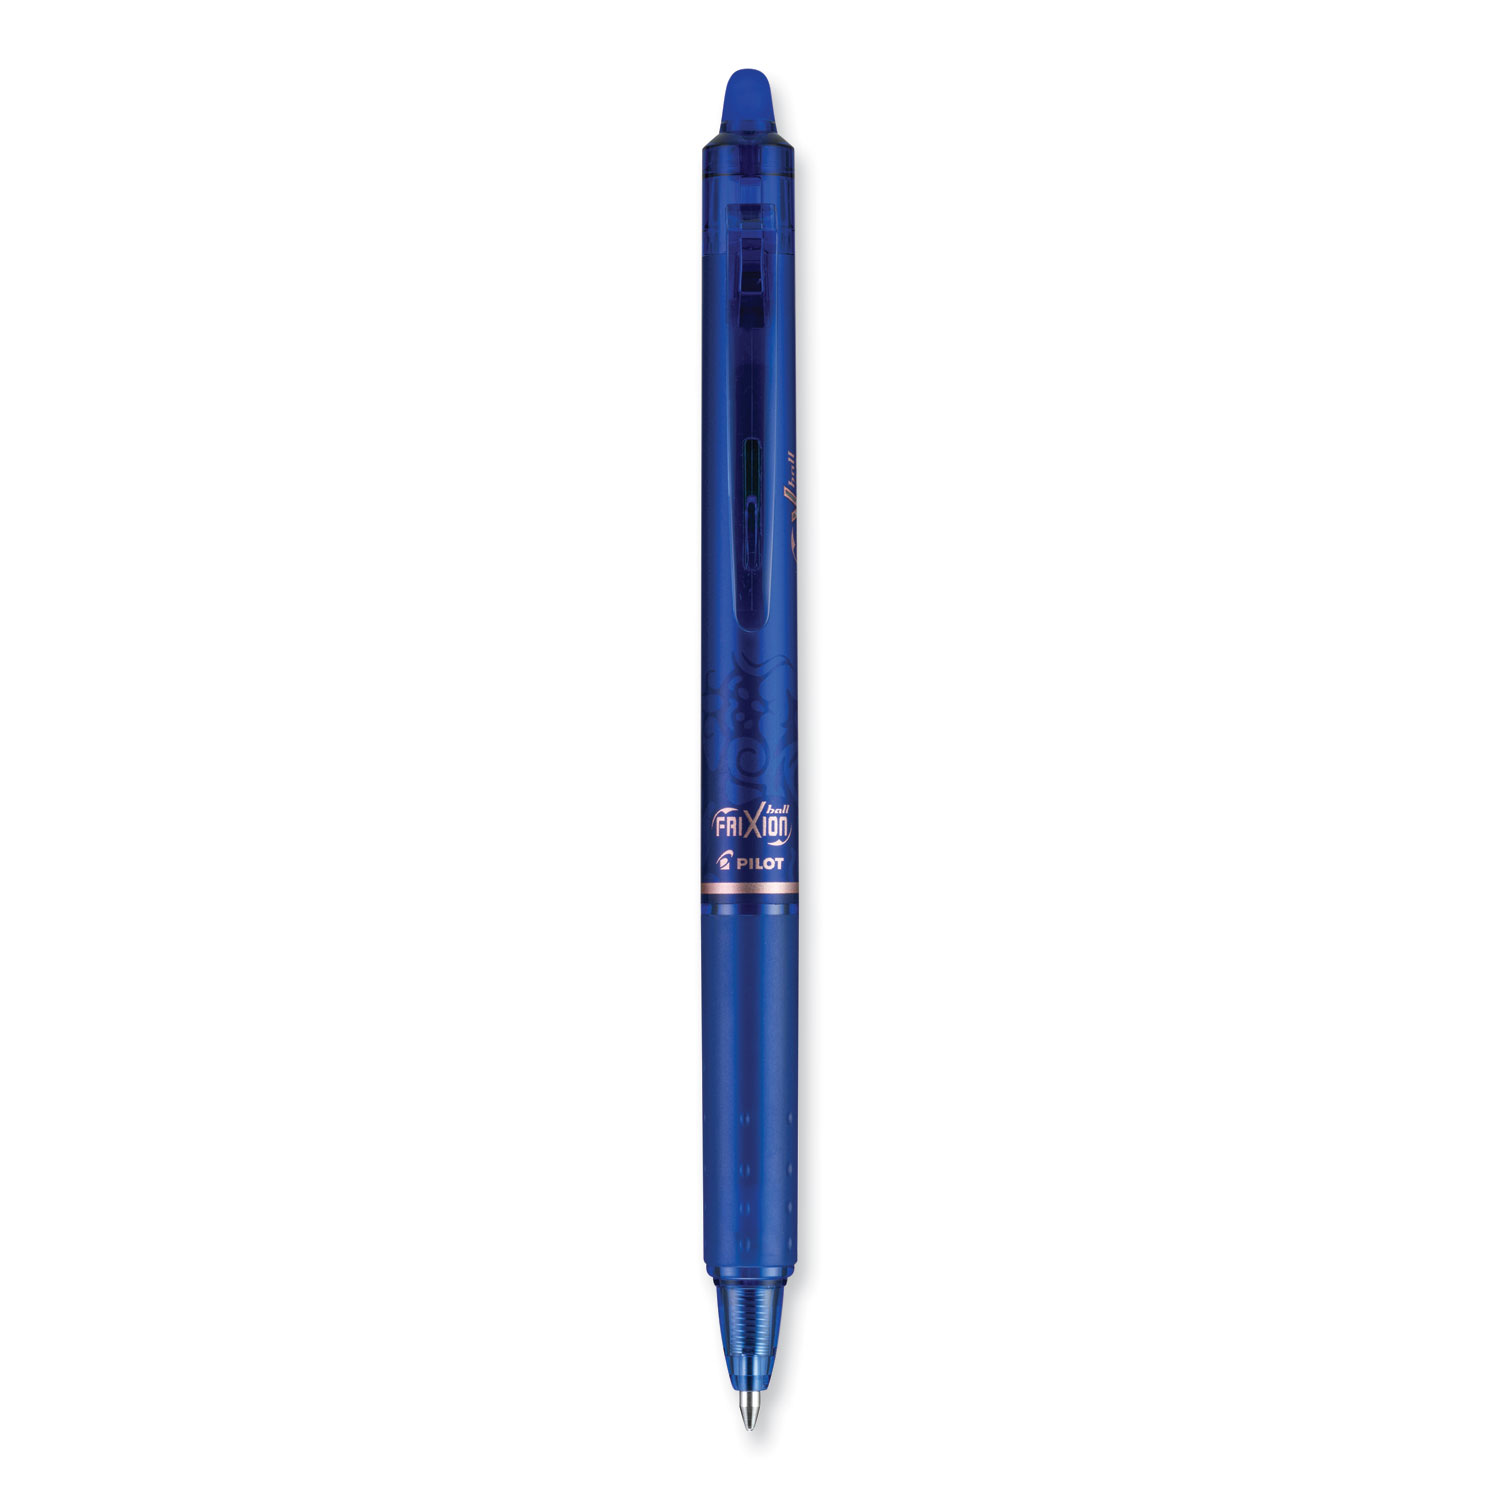 Pilot Frixion Clicker Retractable Erasable Rollerball, 0.7 mm Tip -  Black/Blue/Red, Pack of 3